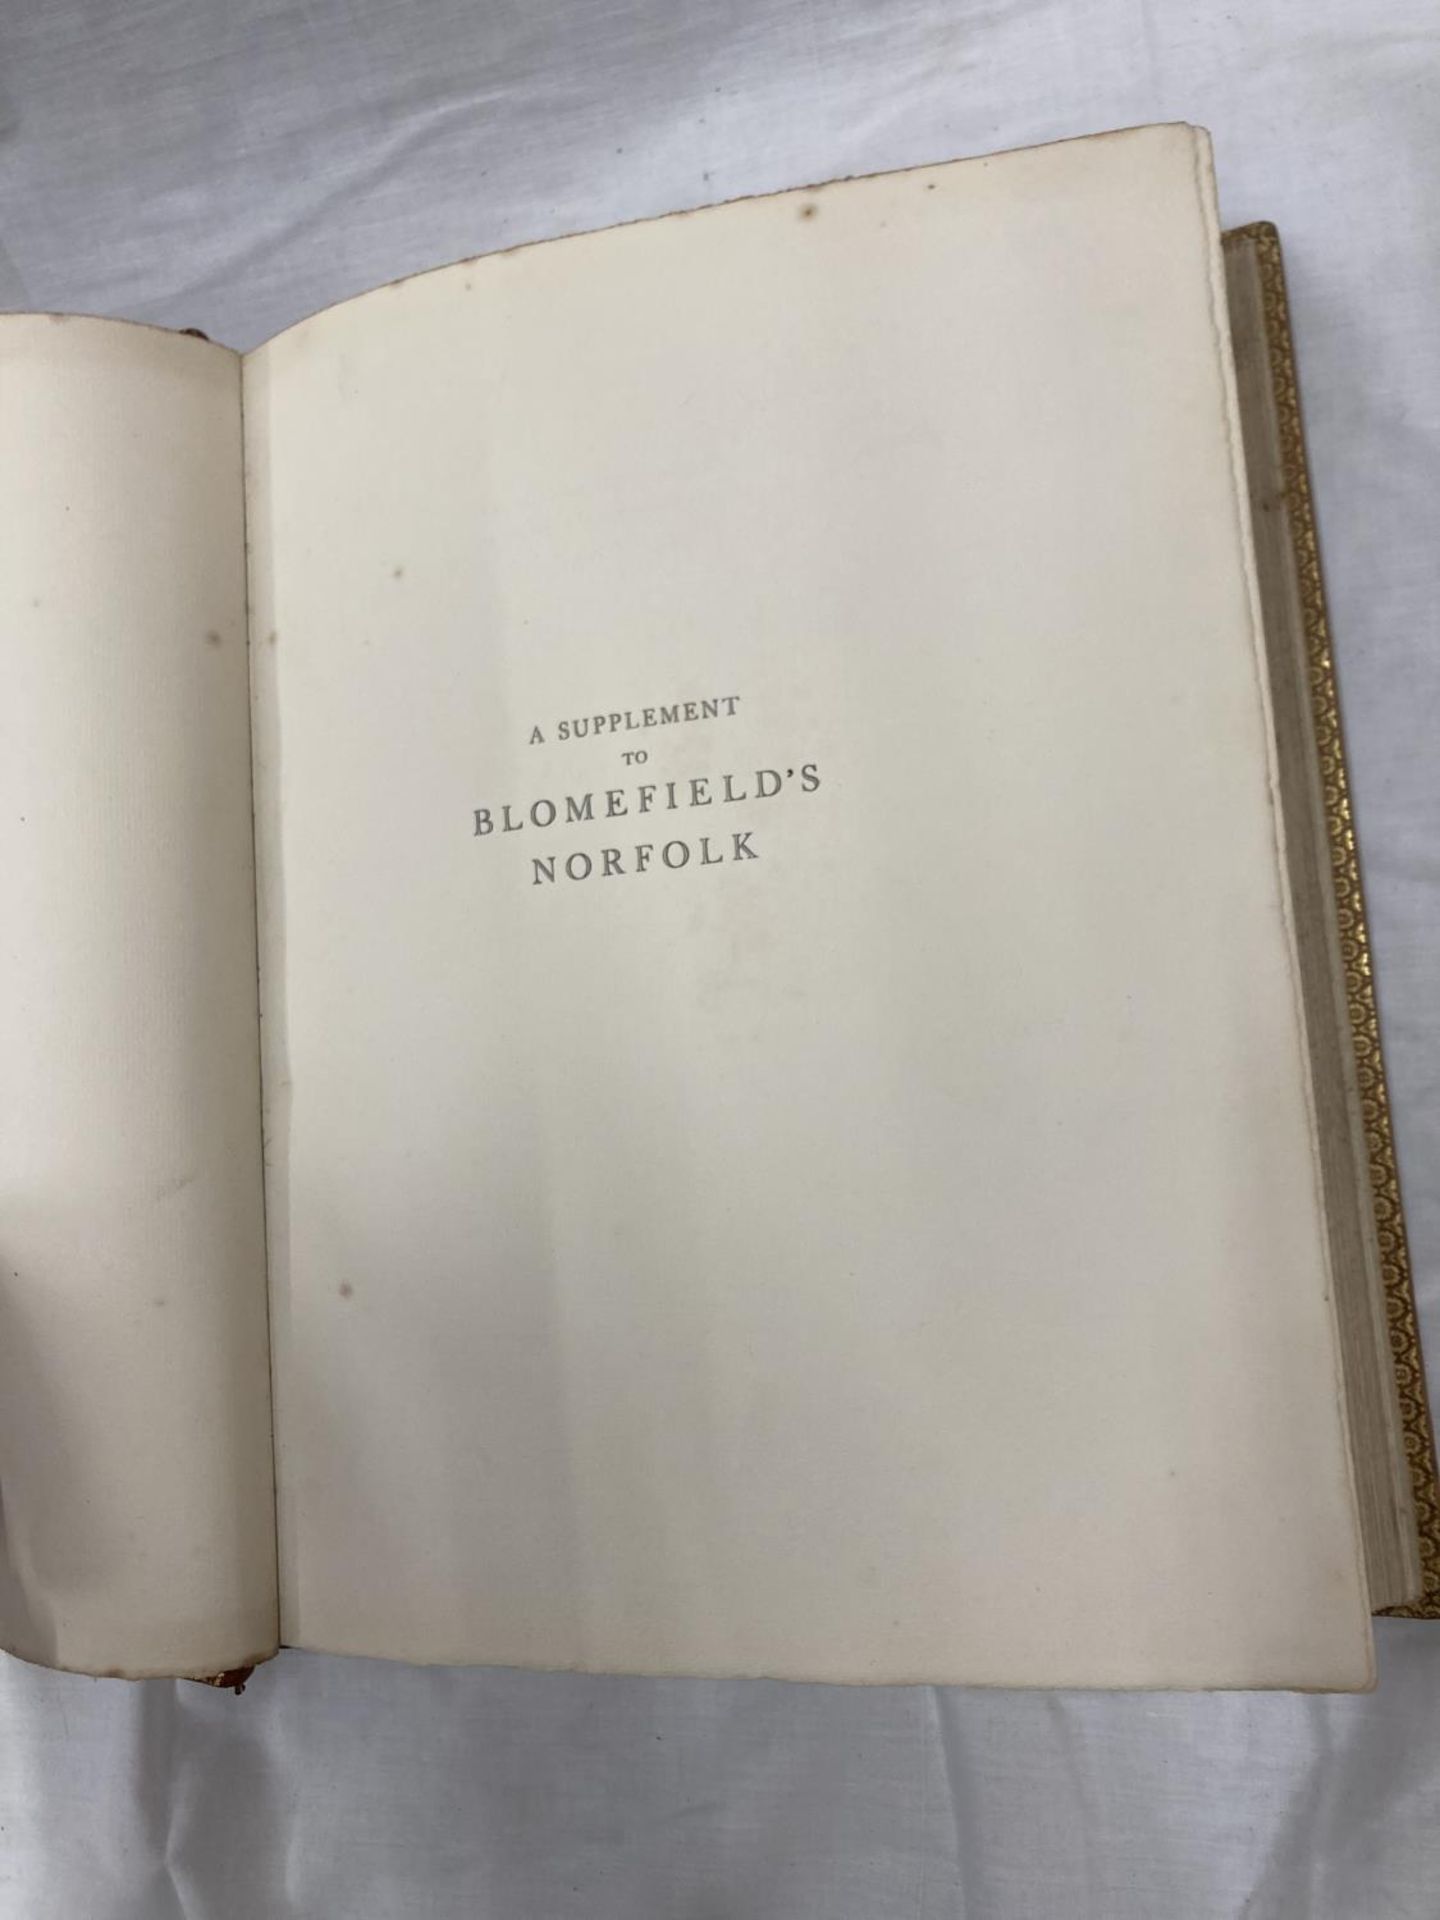 A SUPPLEMENT TO BLOOMFIELD'S NORFOLK - 1929 FOLIO SIZE, GILT TOP PAGE EDGES, PAGES CLEAN AND VG - Image 12 of 16